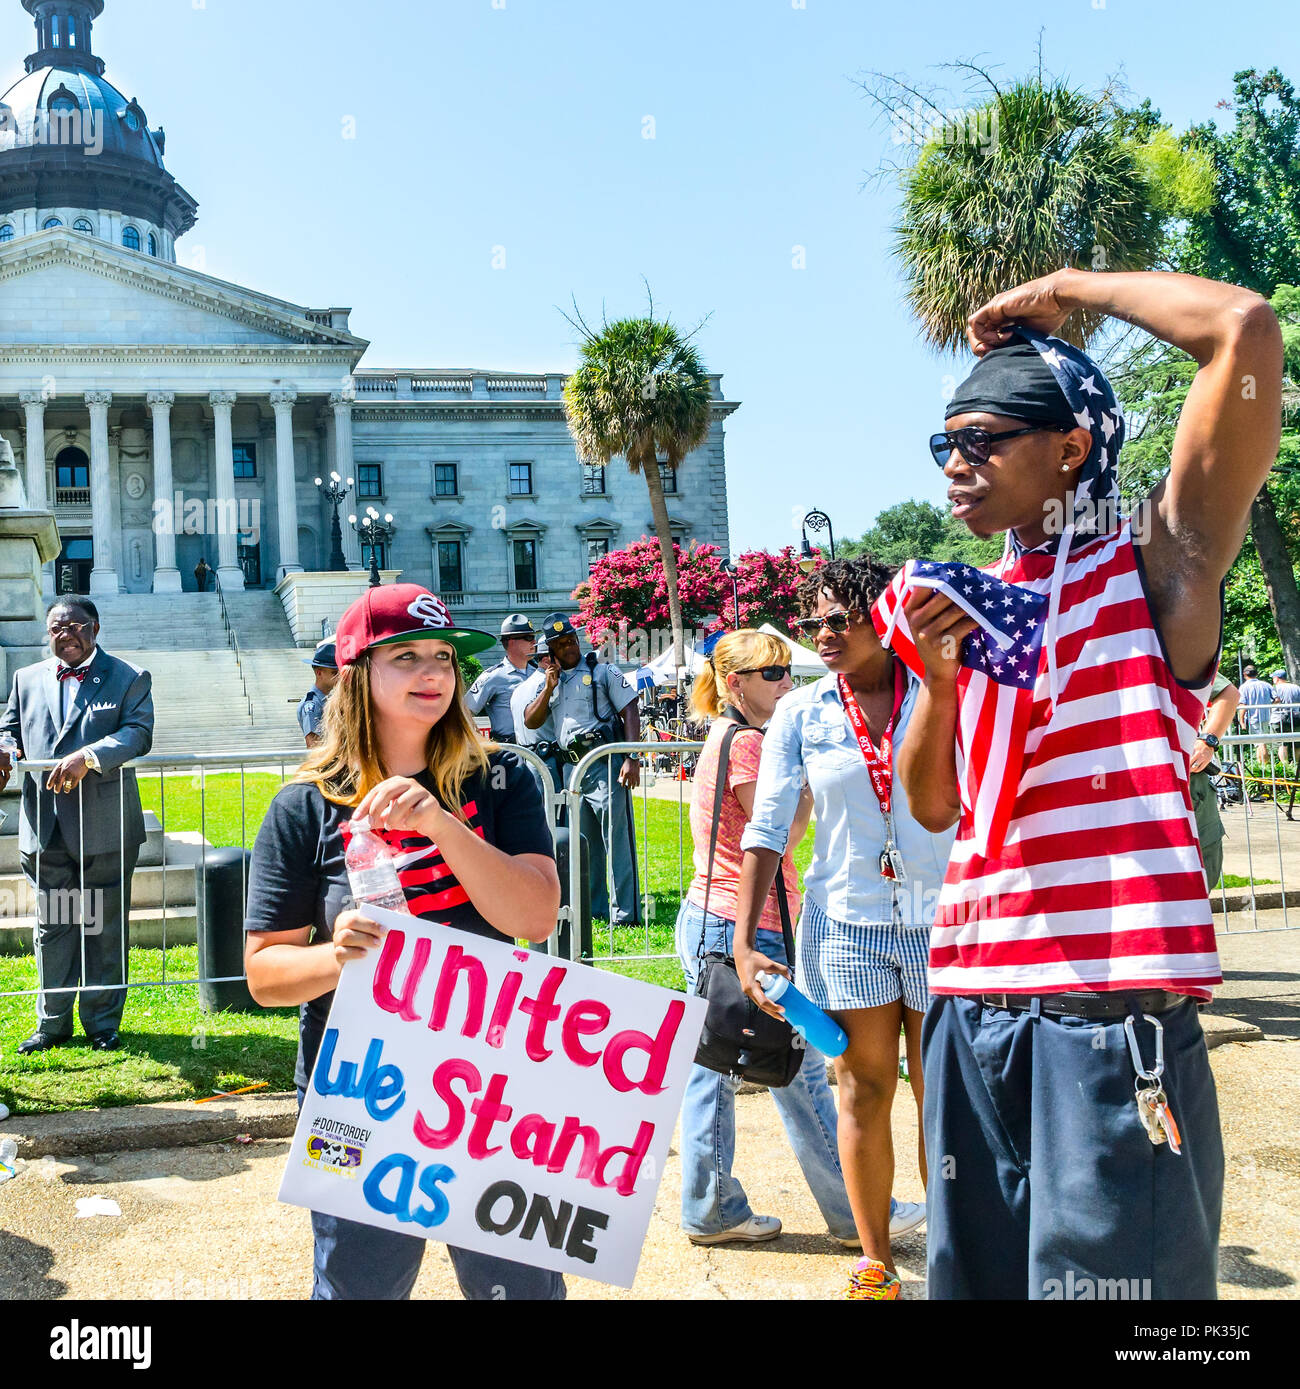 Confederate flag protestors gather outside the South Carolina State House to see the flag's removal, July 10, 2015, in Columbia, South Carolina. Stock Photo